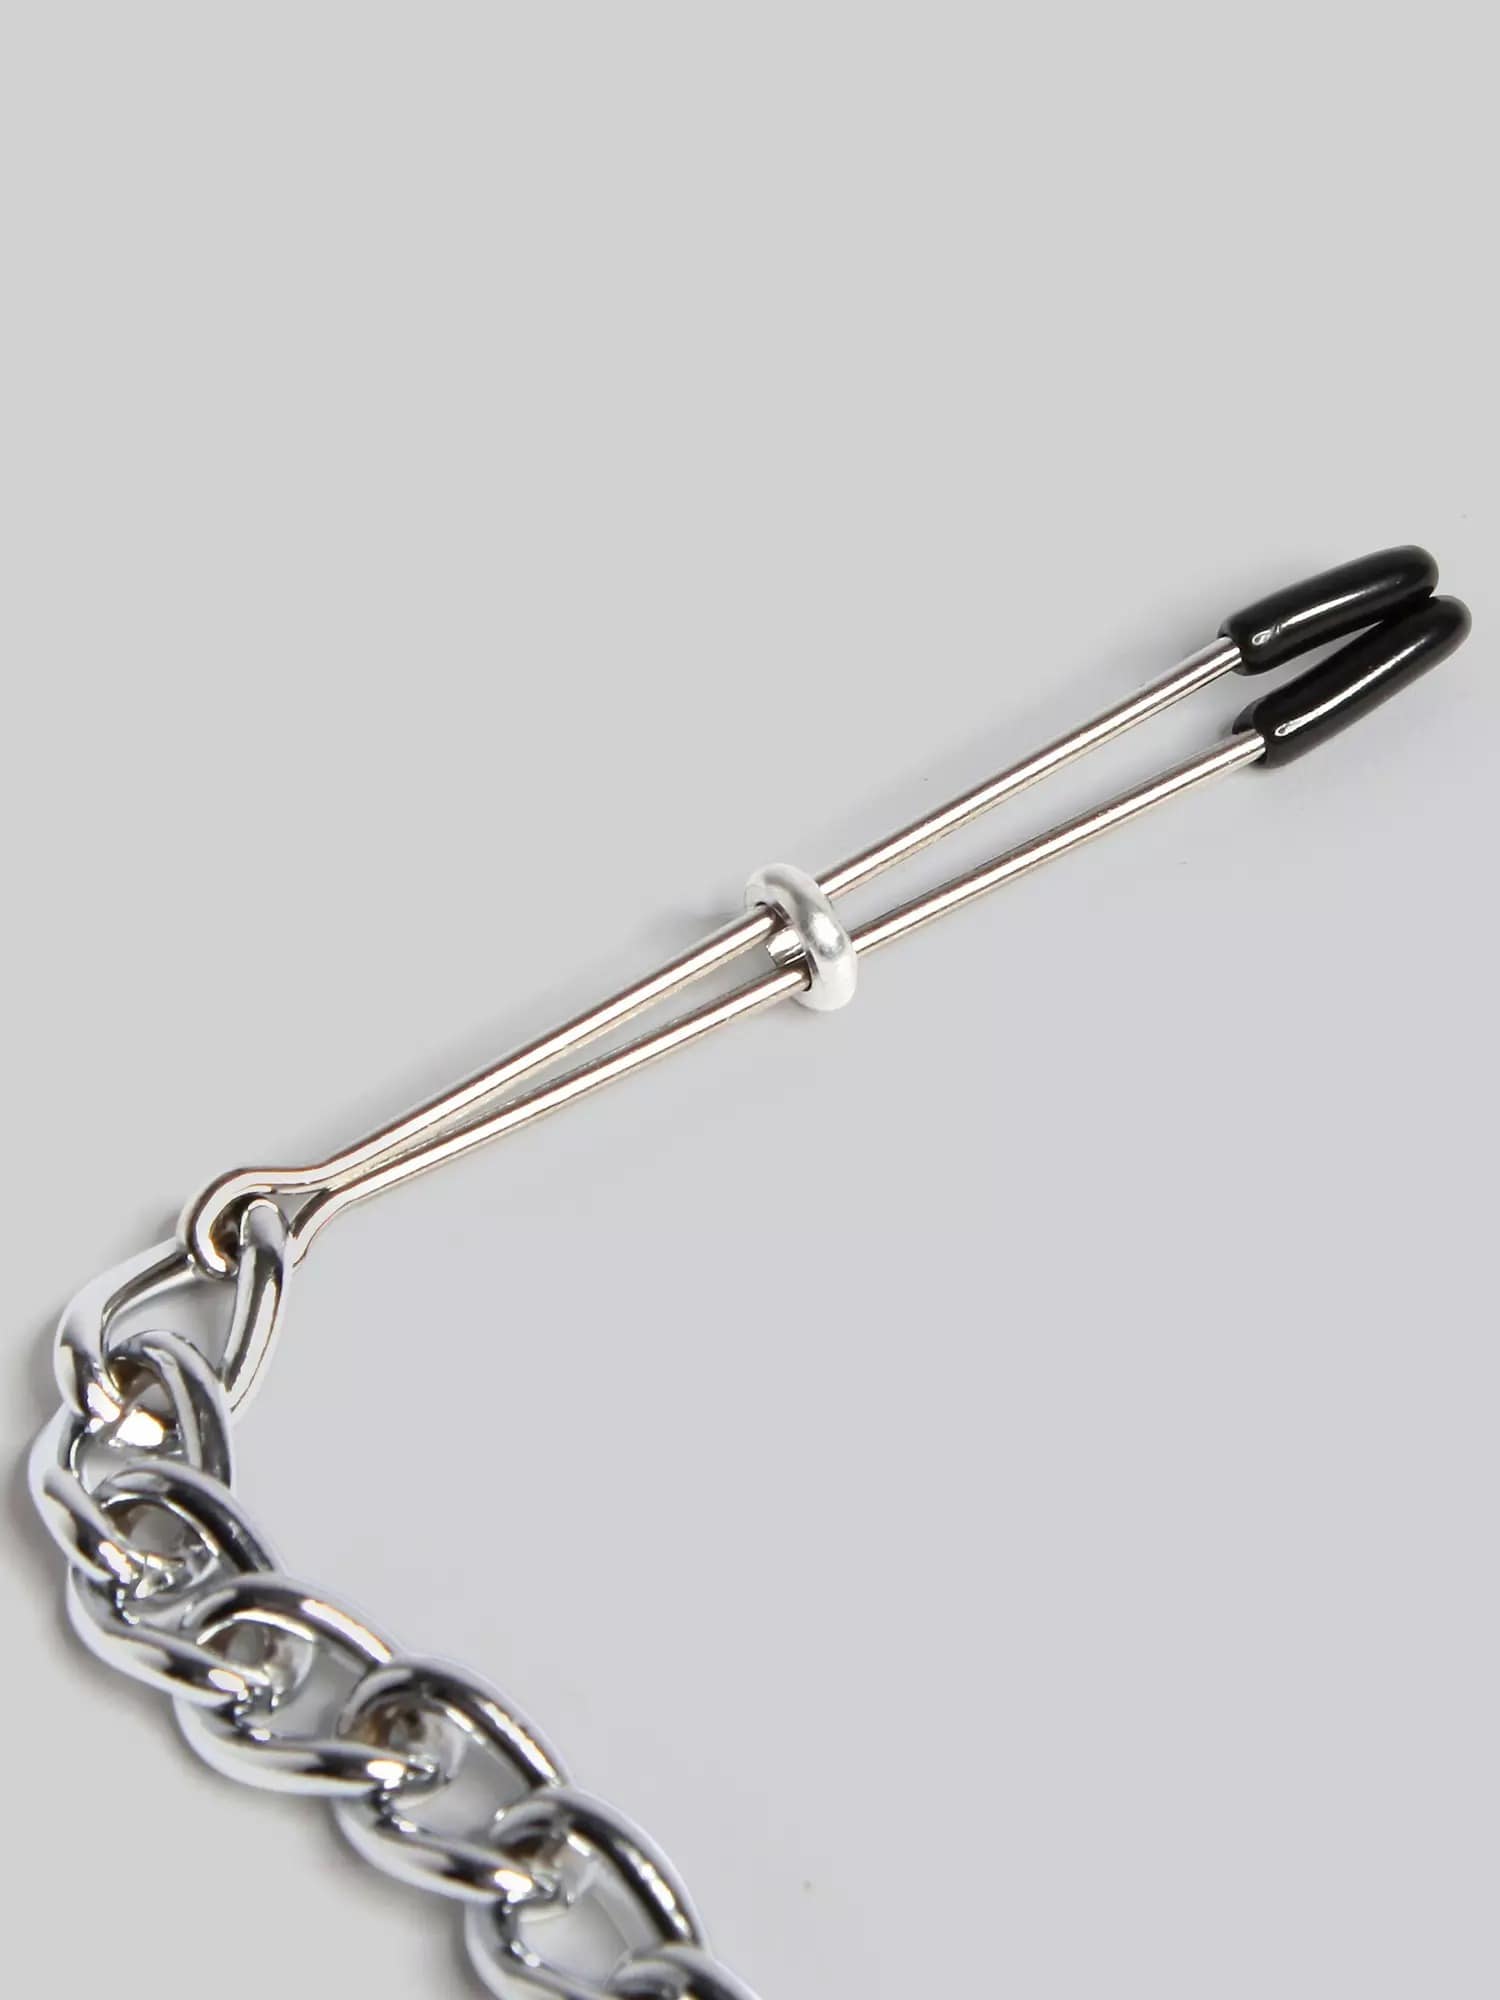 DOMINIX Deluxe Nipple Tweezers and Clit Clamp with Chain. Slide 4